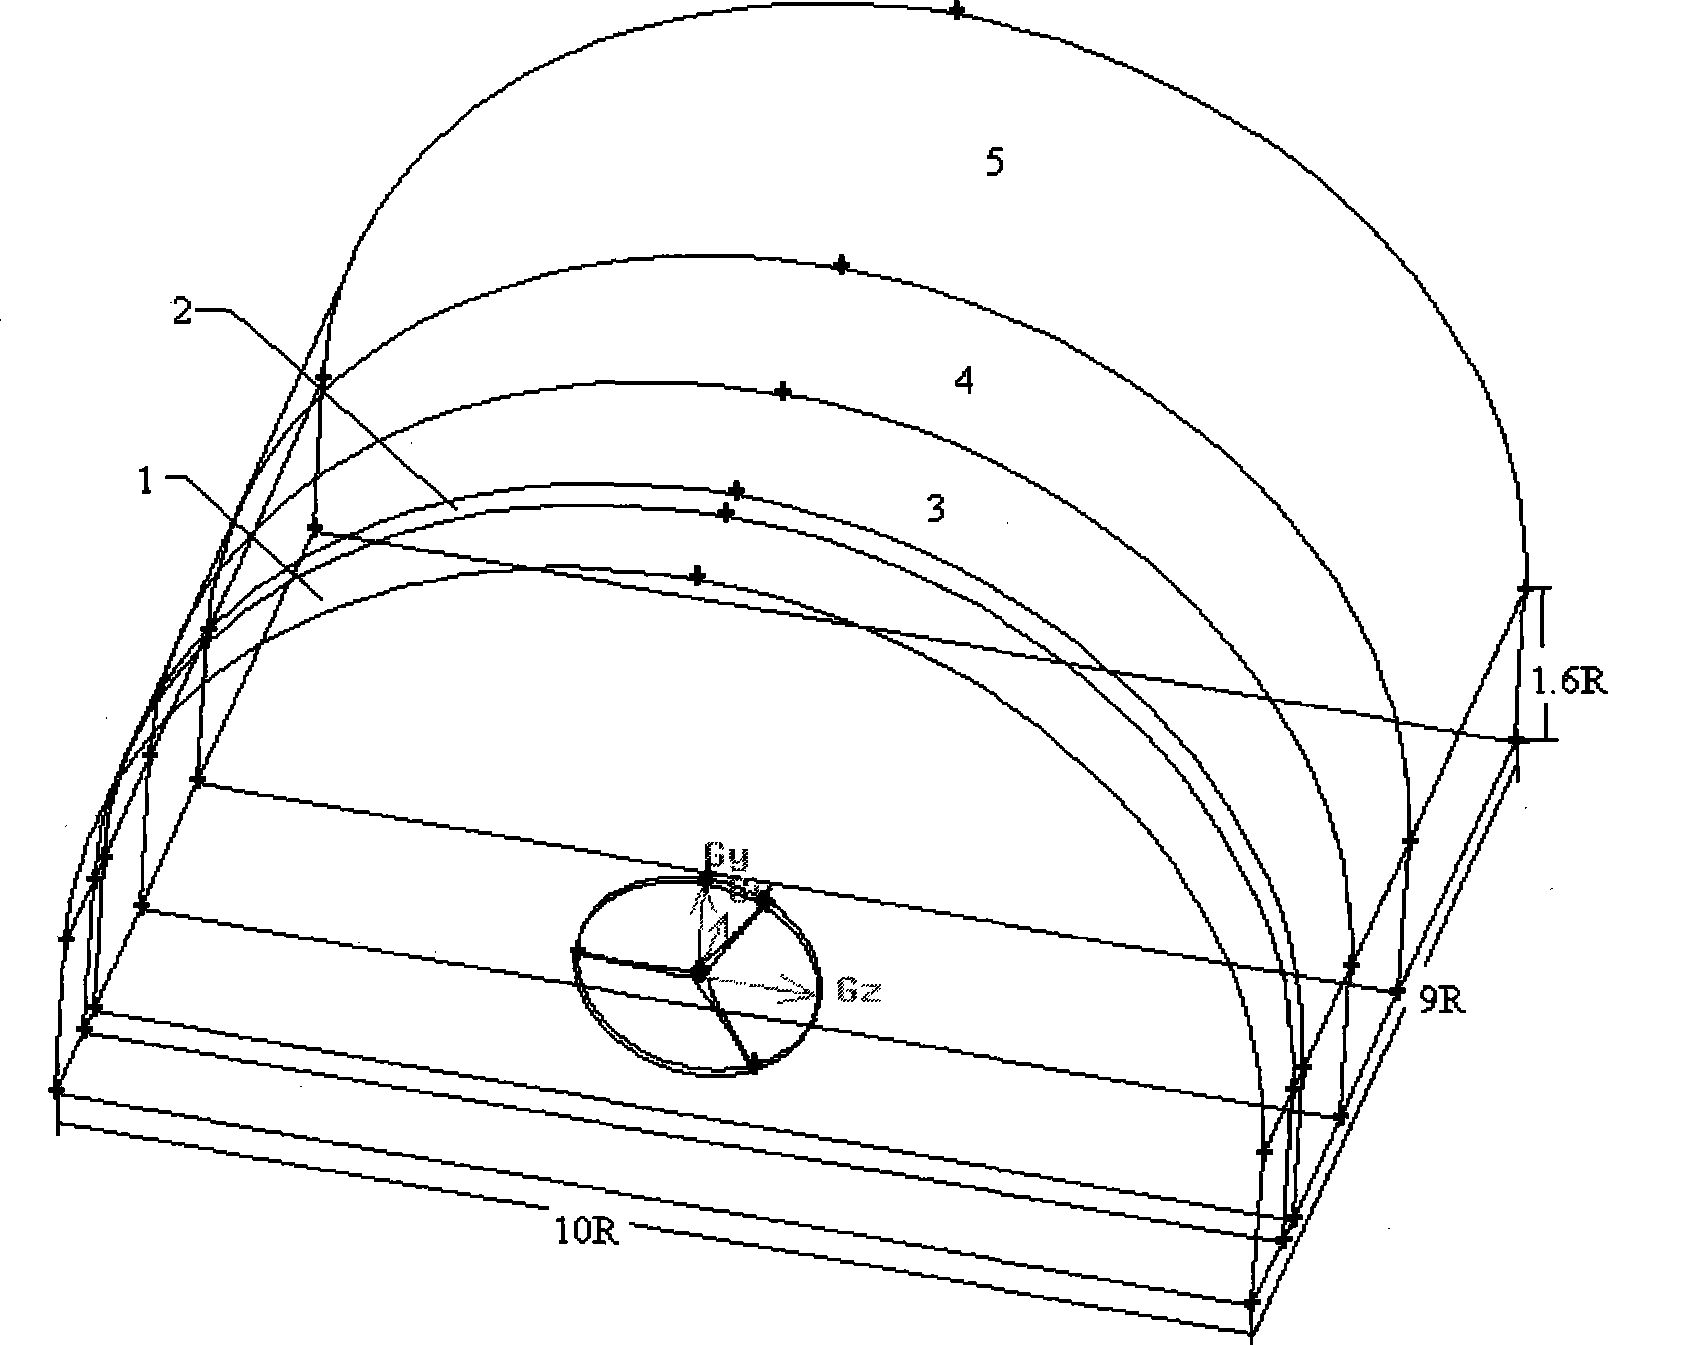 Method for analyzing fluid dynamics and structural mechanics of wind generator blades